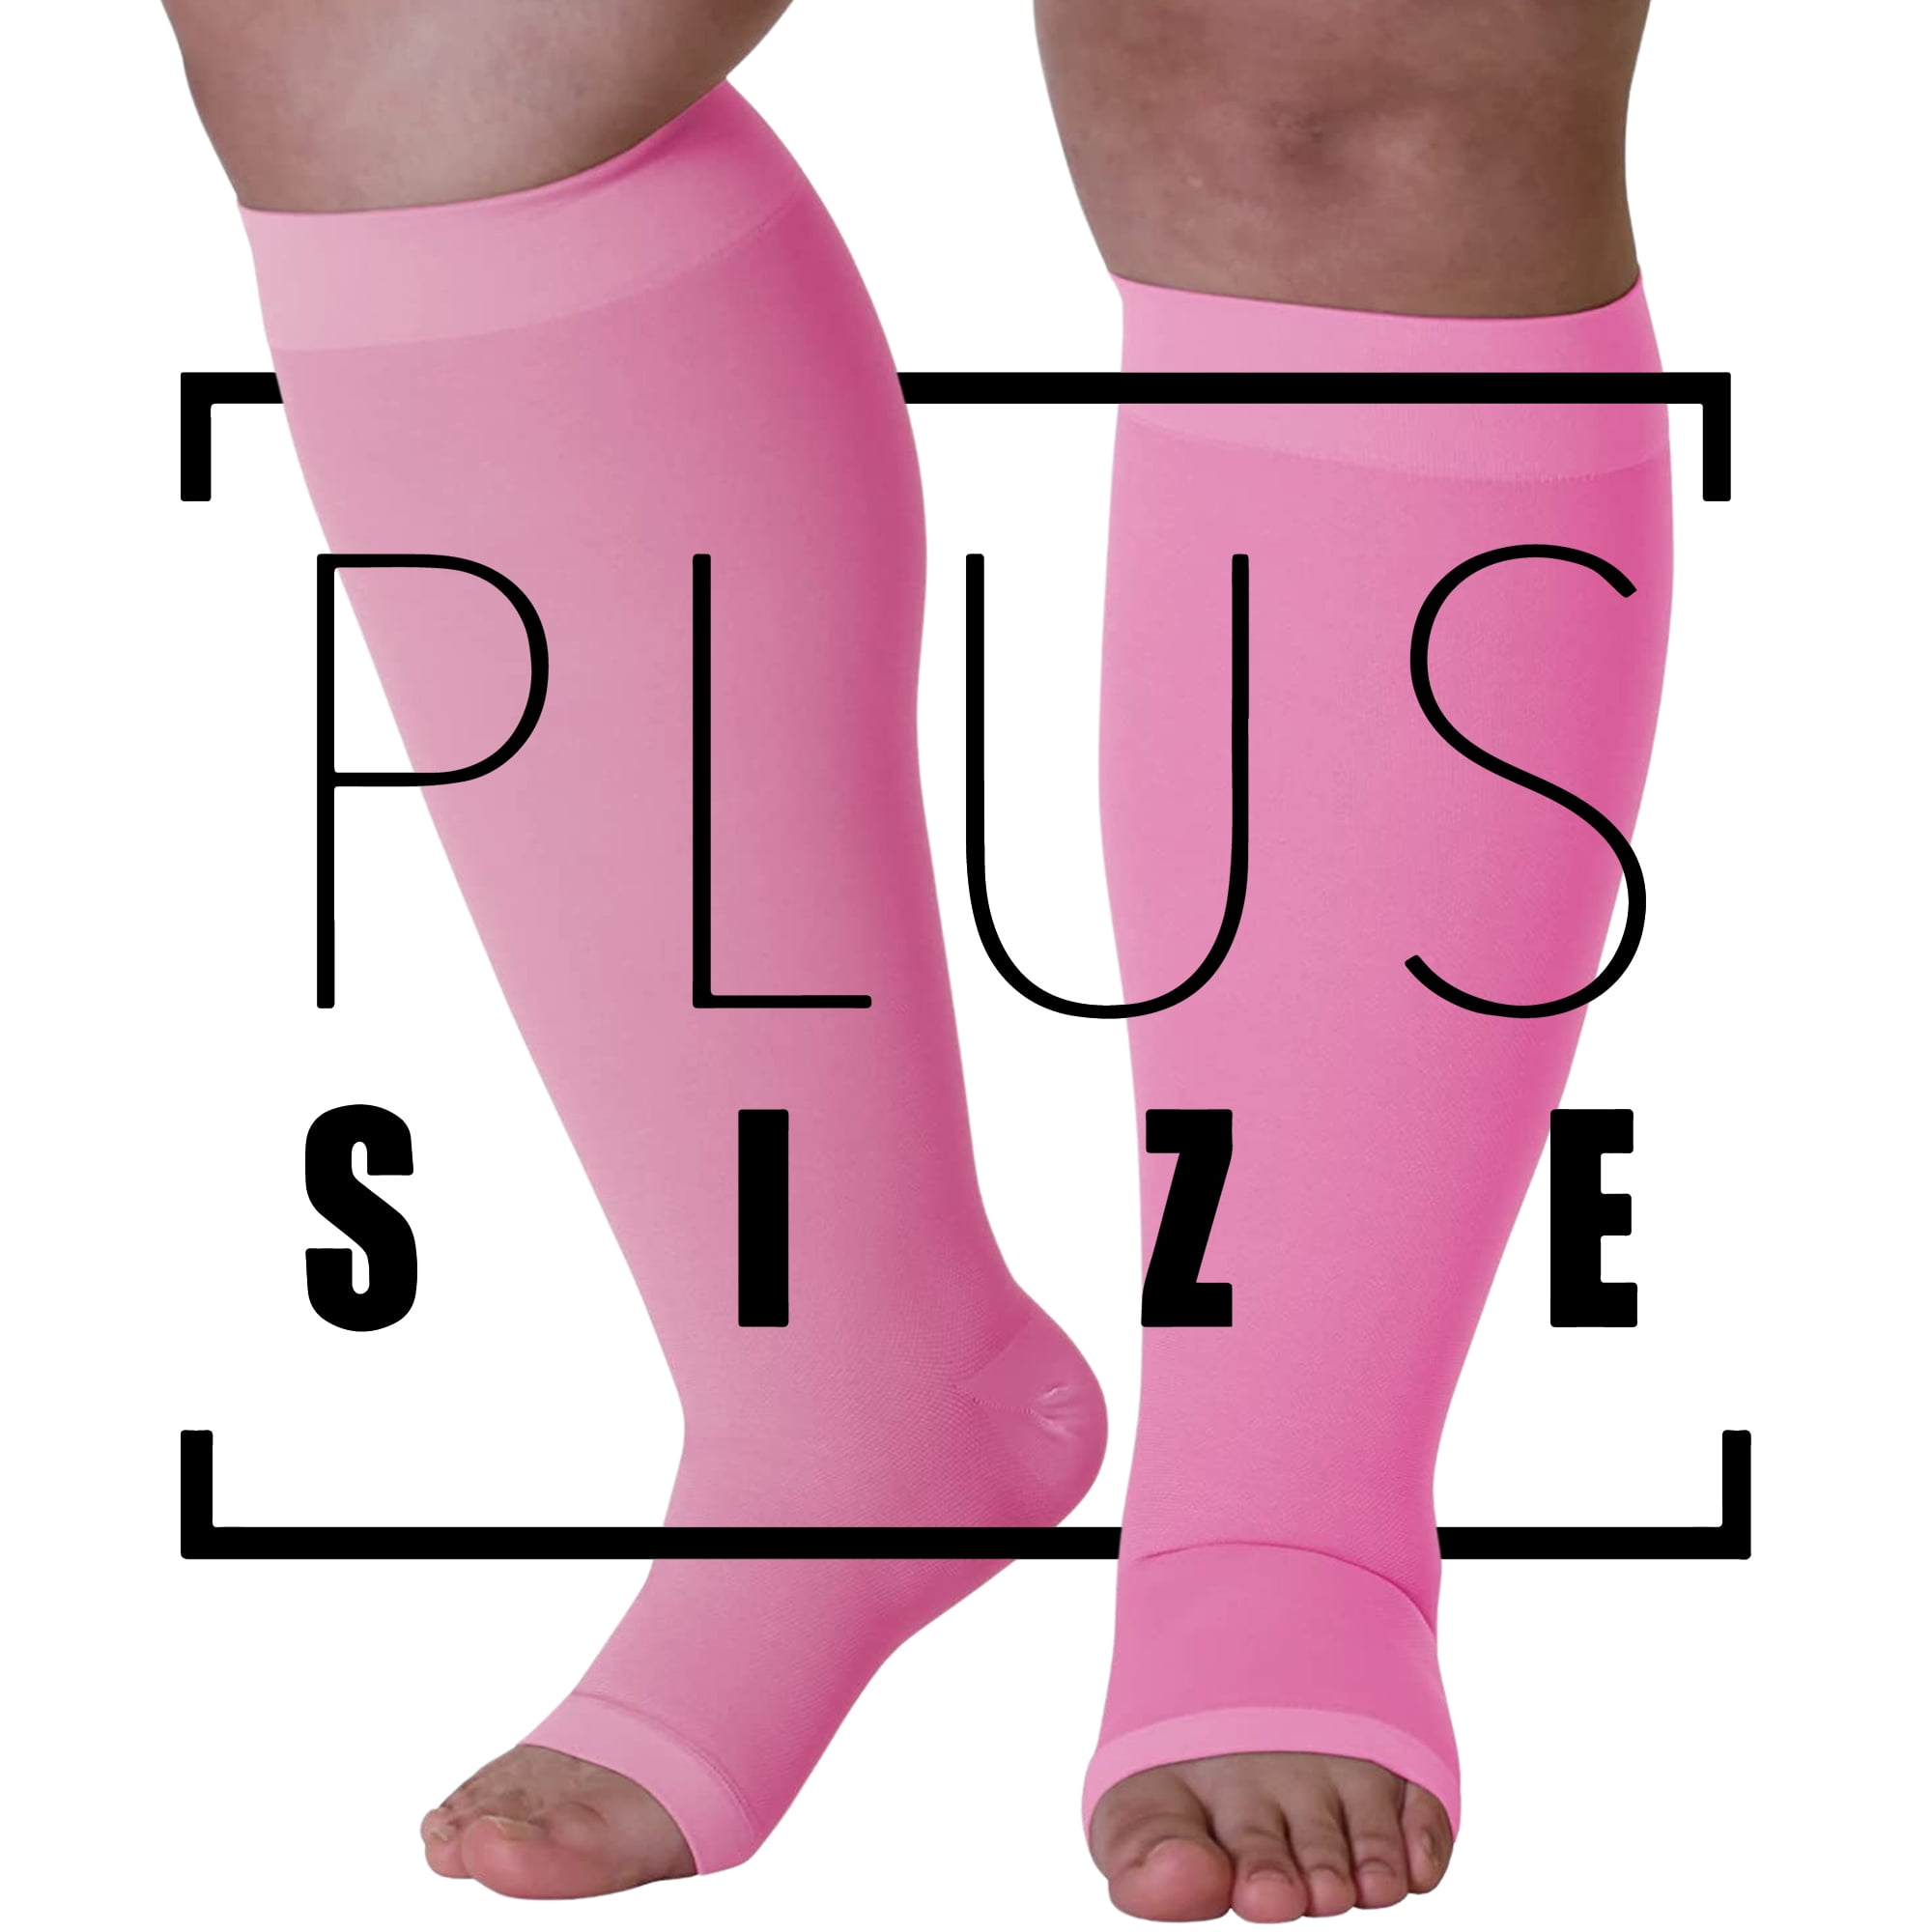 WHOTAY Plus Size Compression Socks Wide Calf for Women 20-30mmhg 2xl 3xl  4xl 5xl diabetic circulation breathable for nurse varices